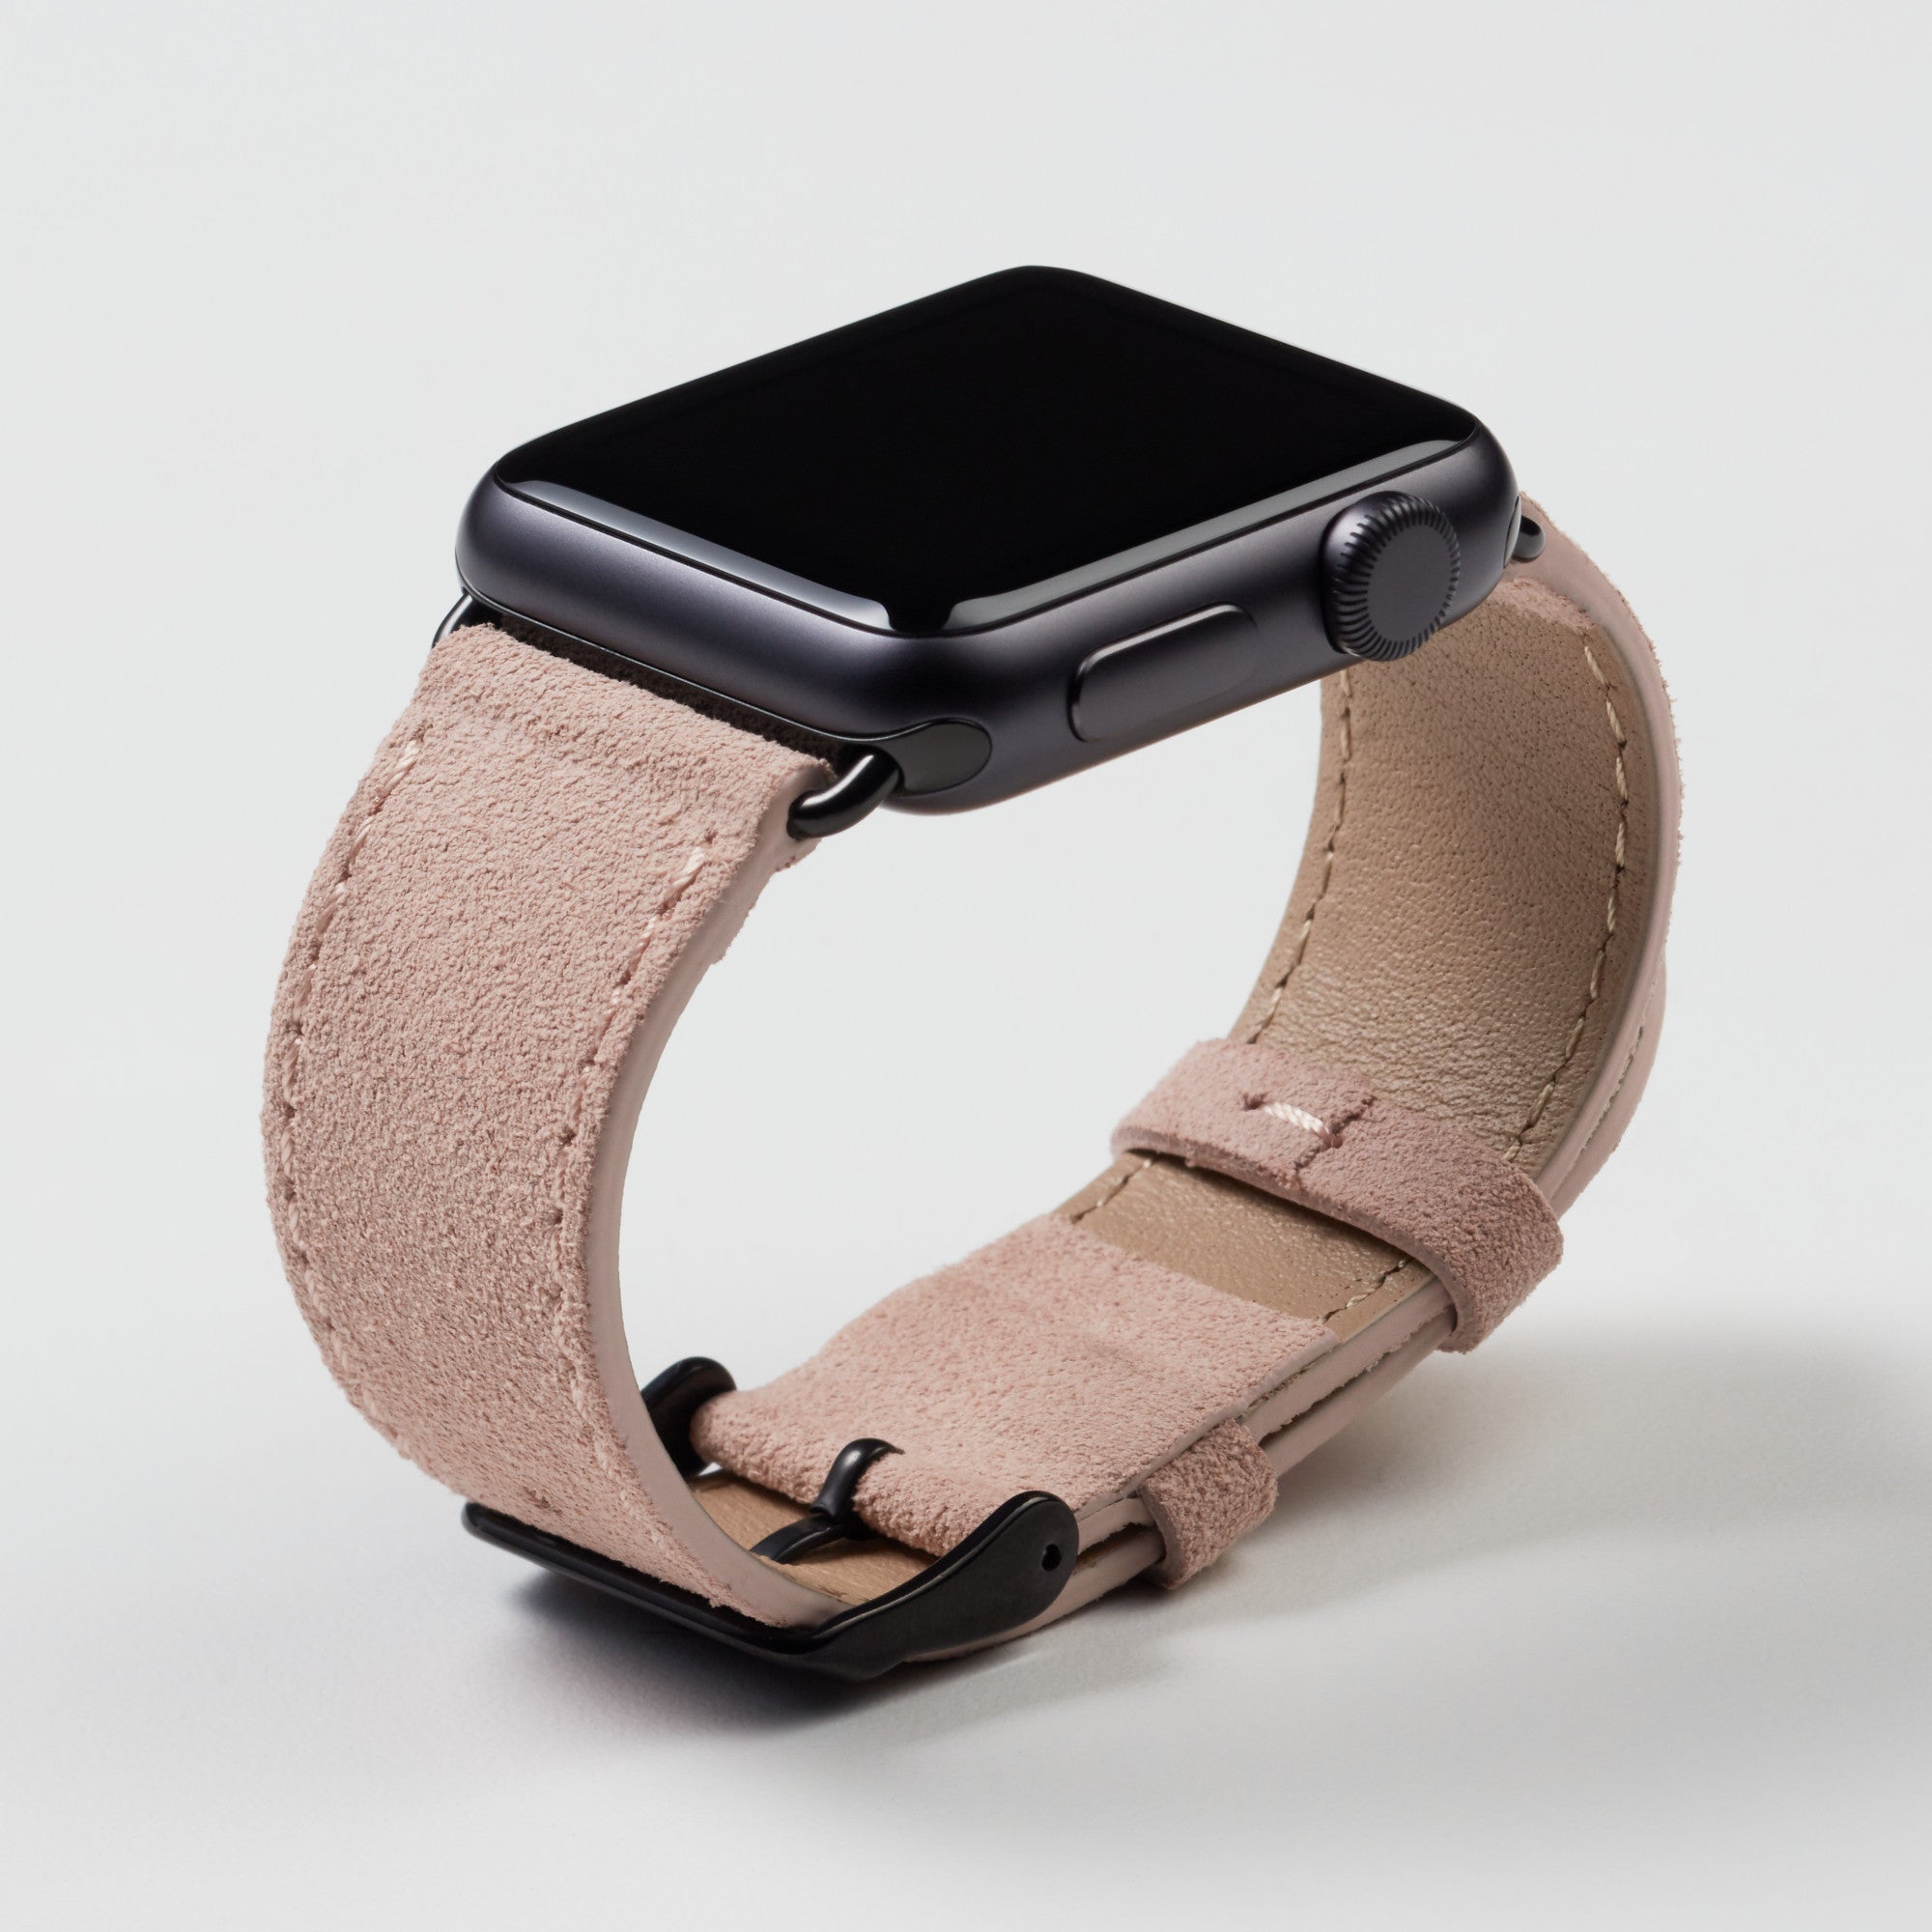 Pin and Buckle Apple Watch Bands - Velour - Suede Leather Apple Watch Band - Peach - Black